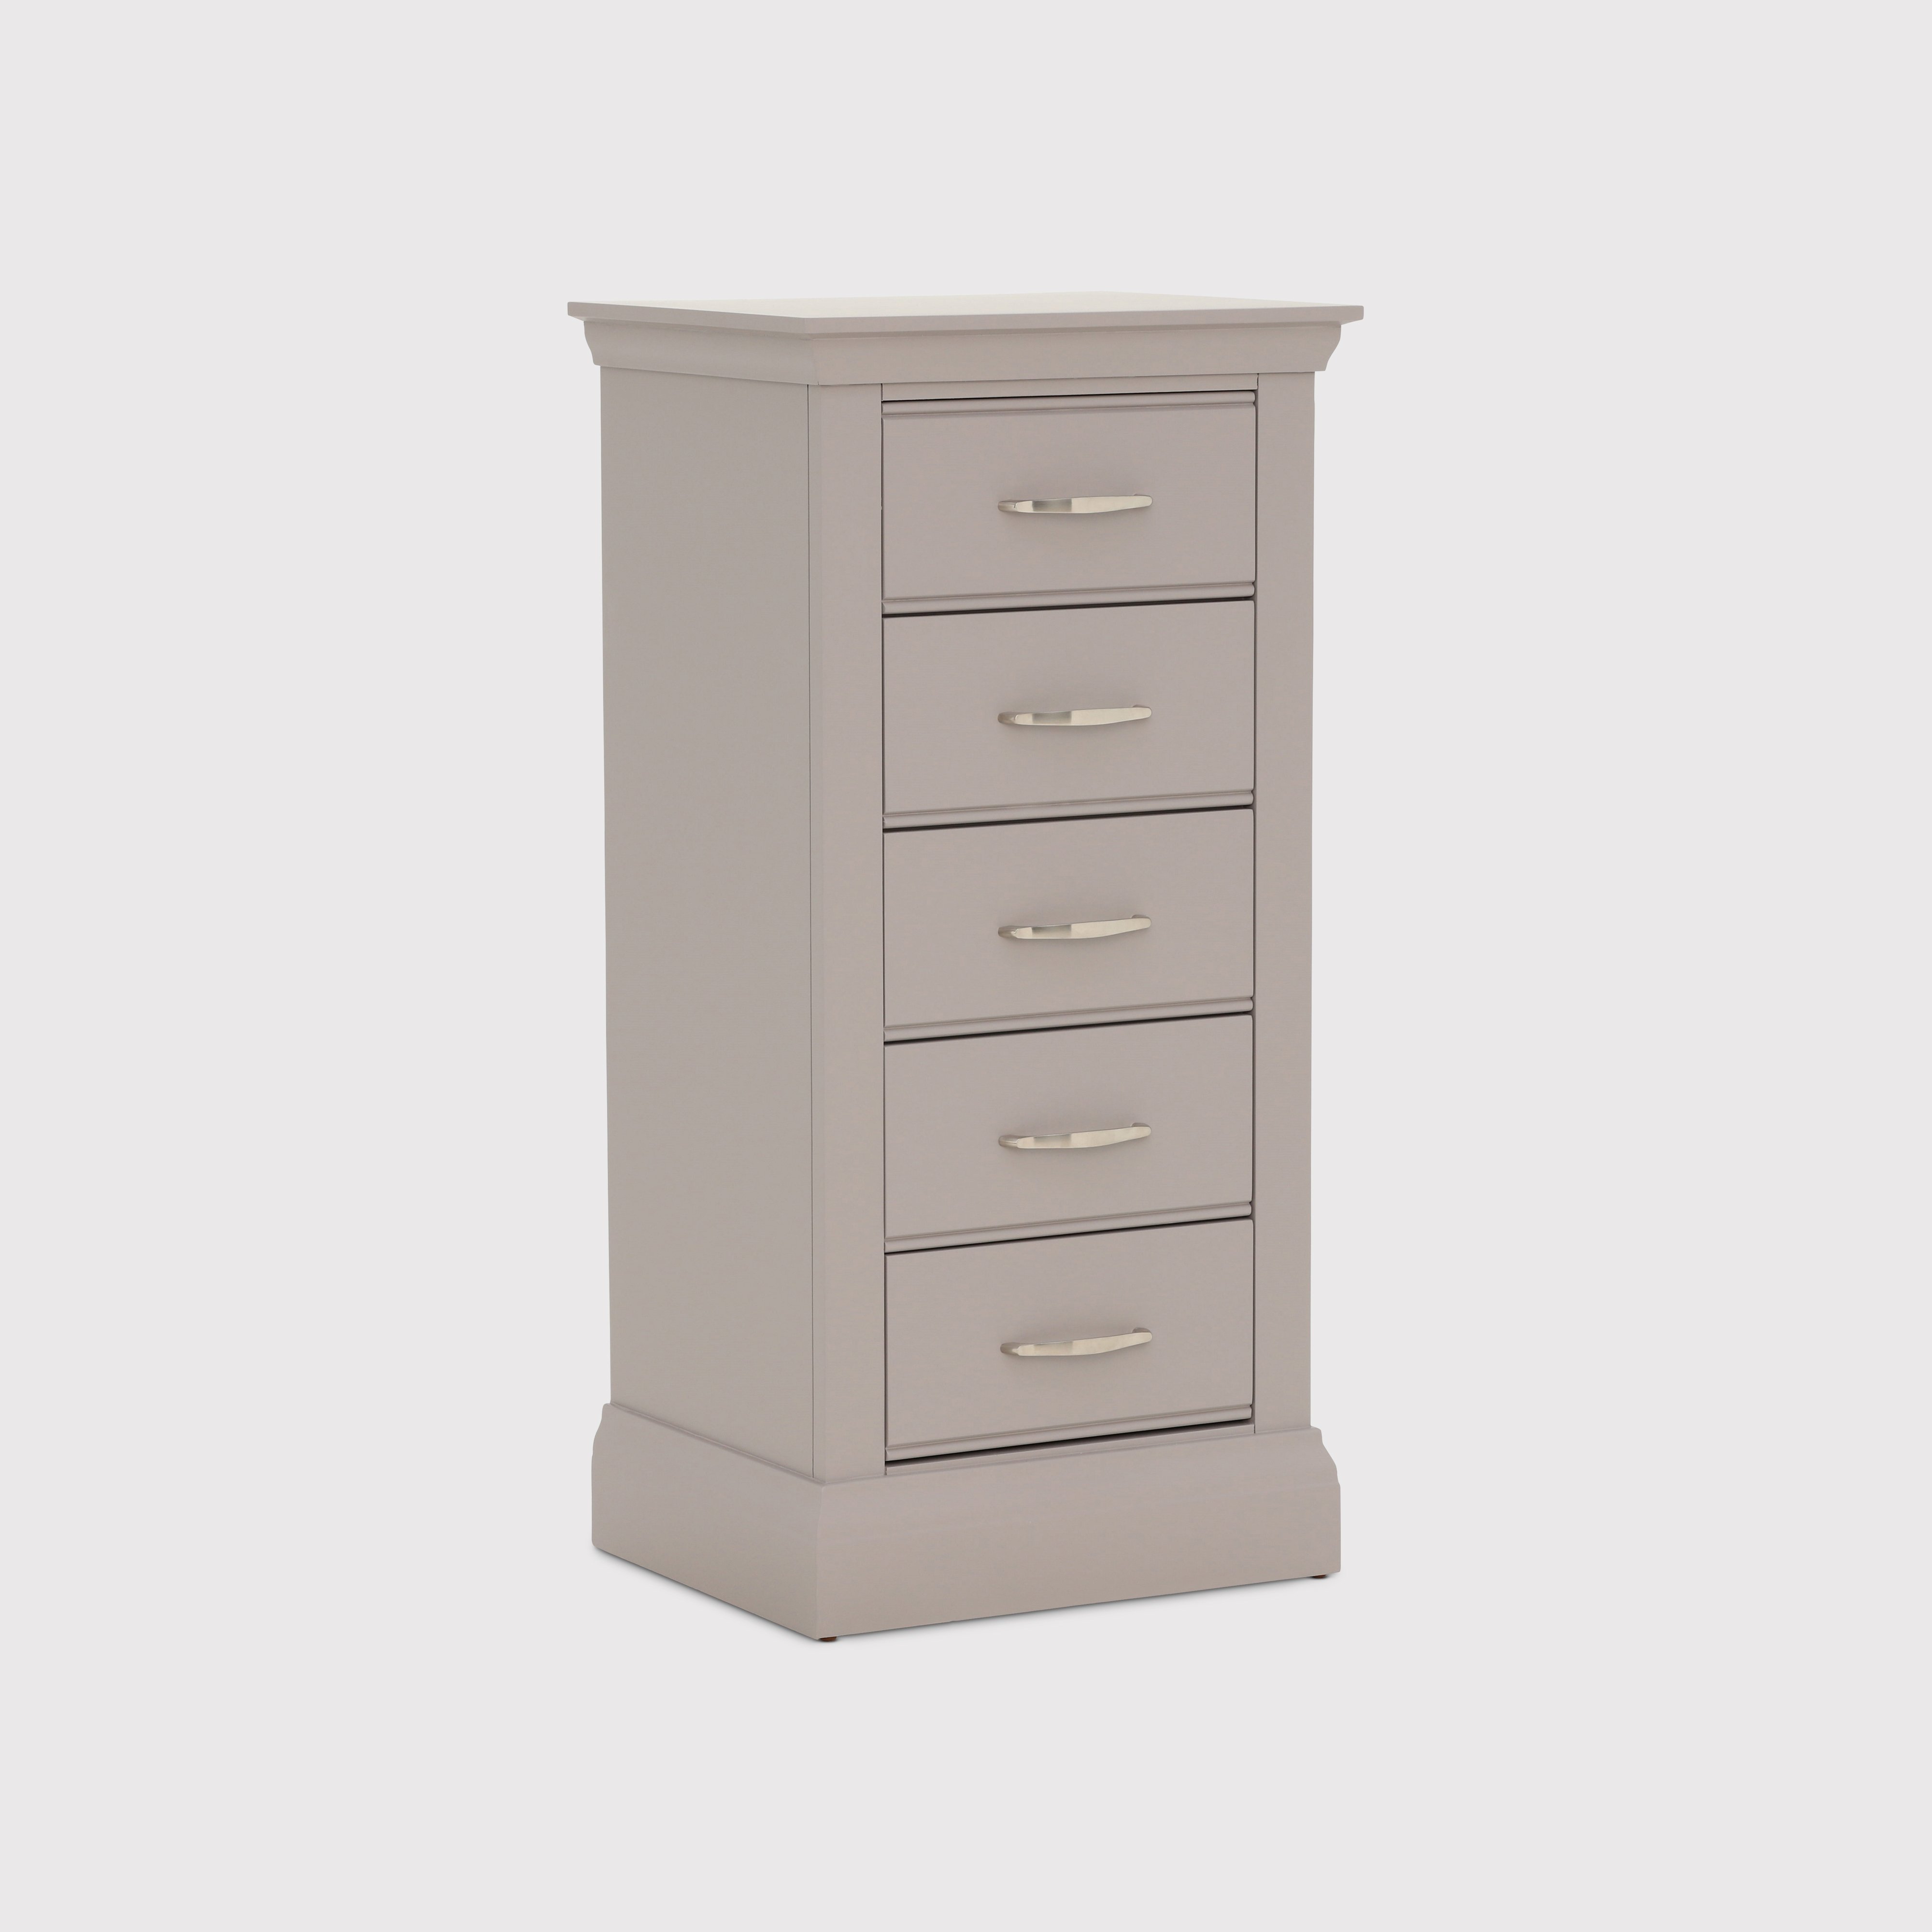 Helmsley 5 Drawer Tall Chest, Grey | Barker & Stonehouse